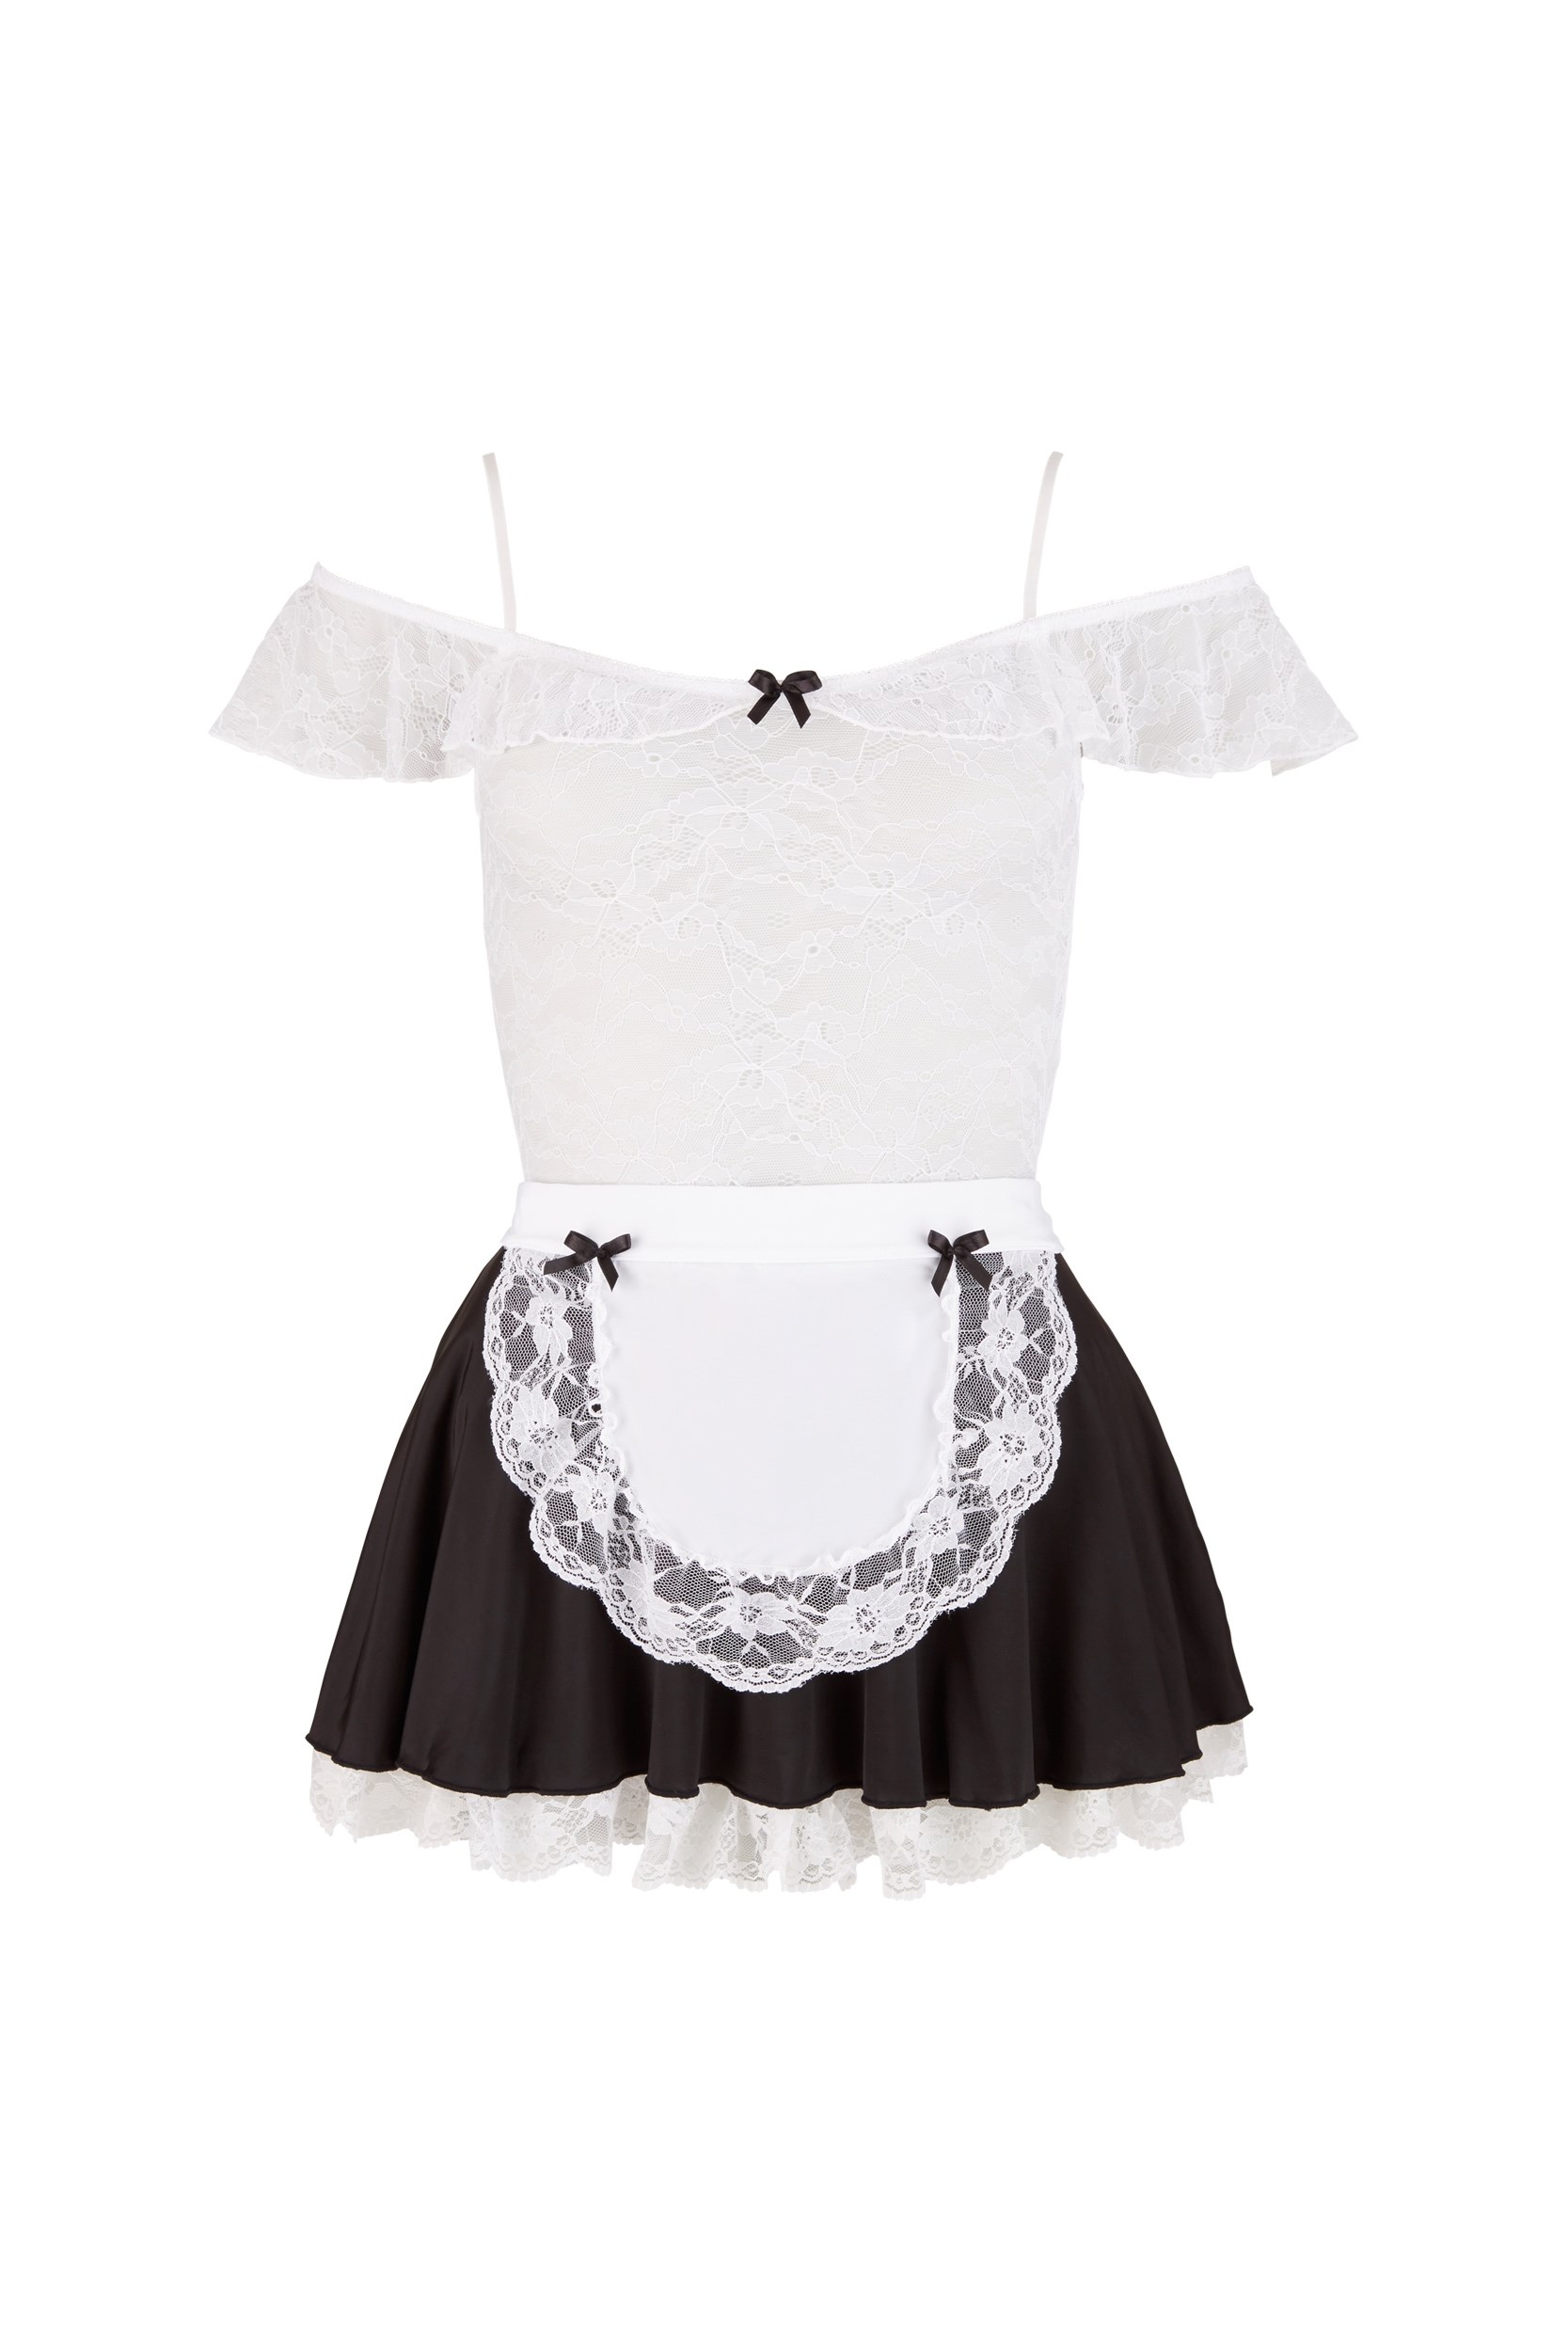 Maid's Dress With Lace Top